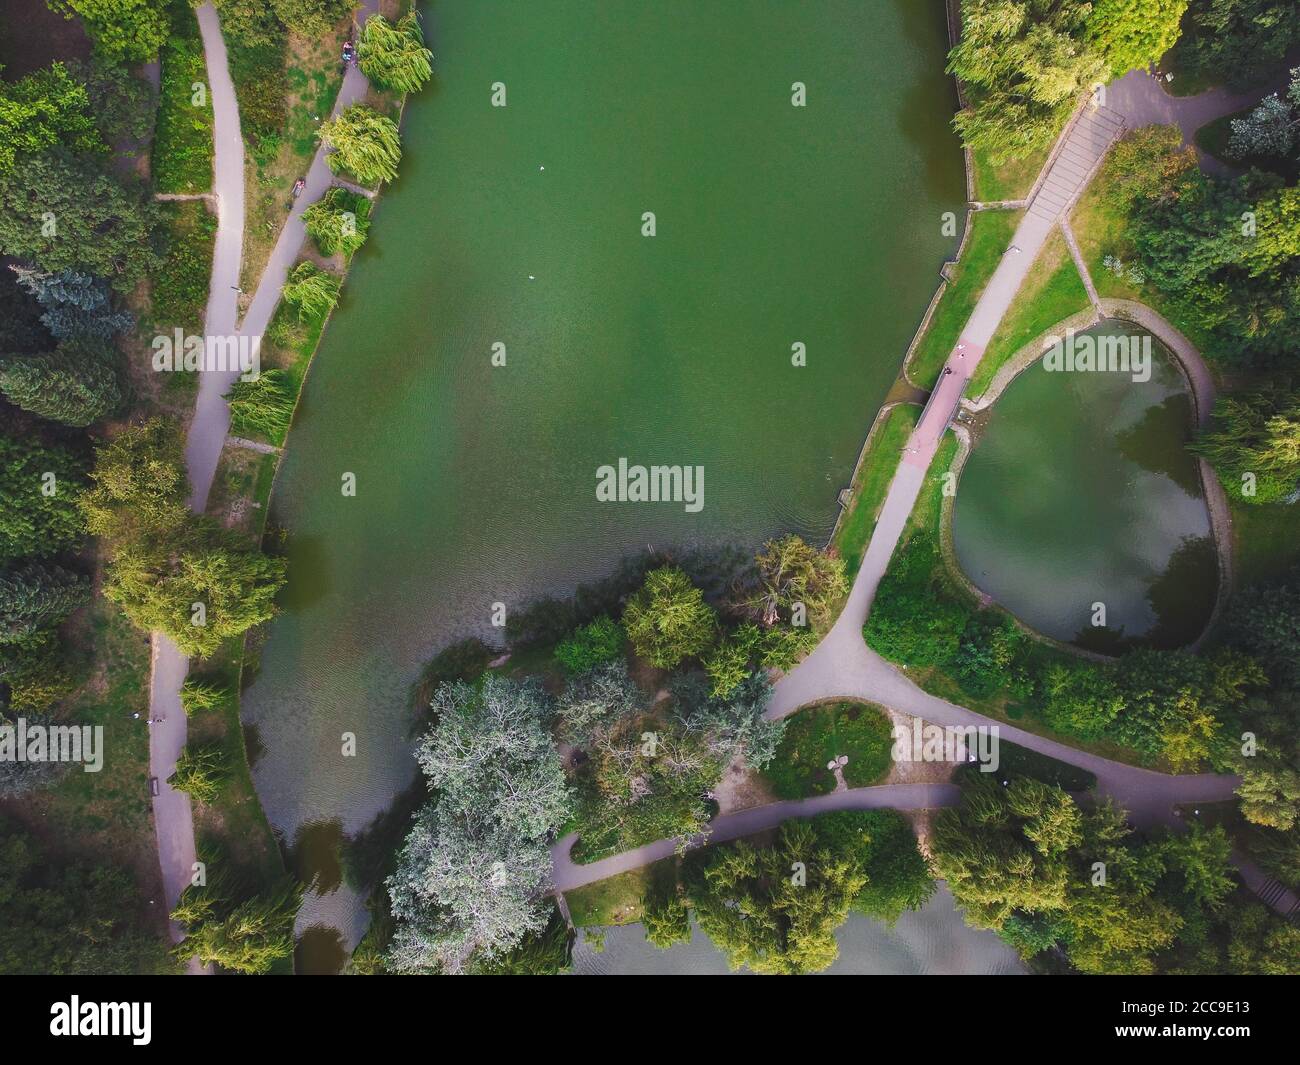 Top down view of trees, pond and alleyways in a park. Drone, aerial view Stock Photo